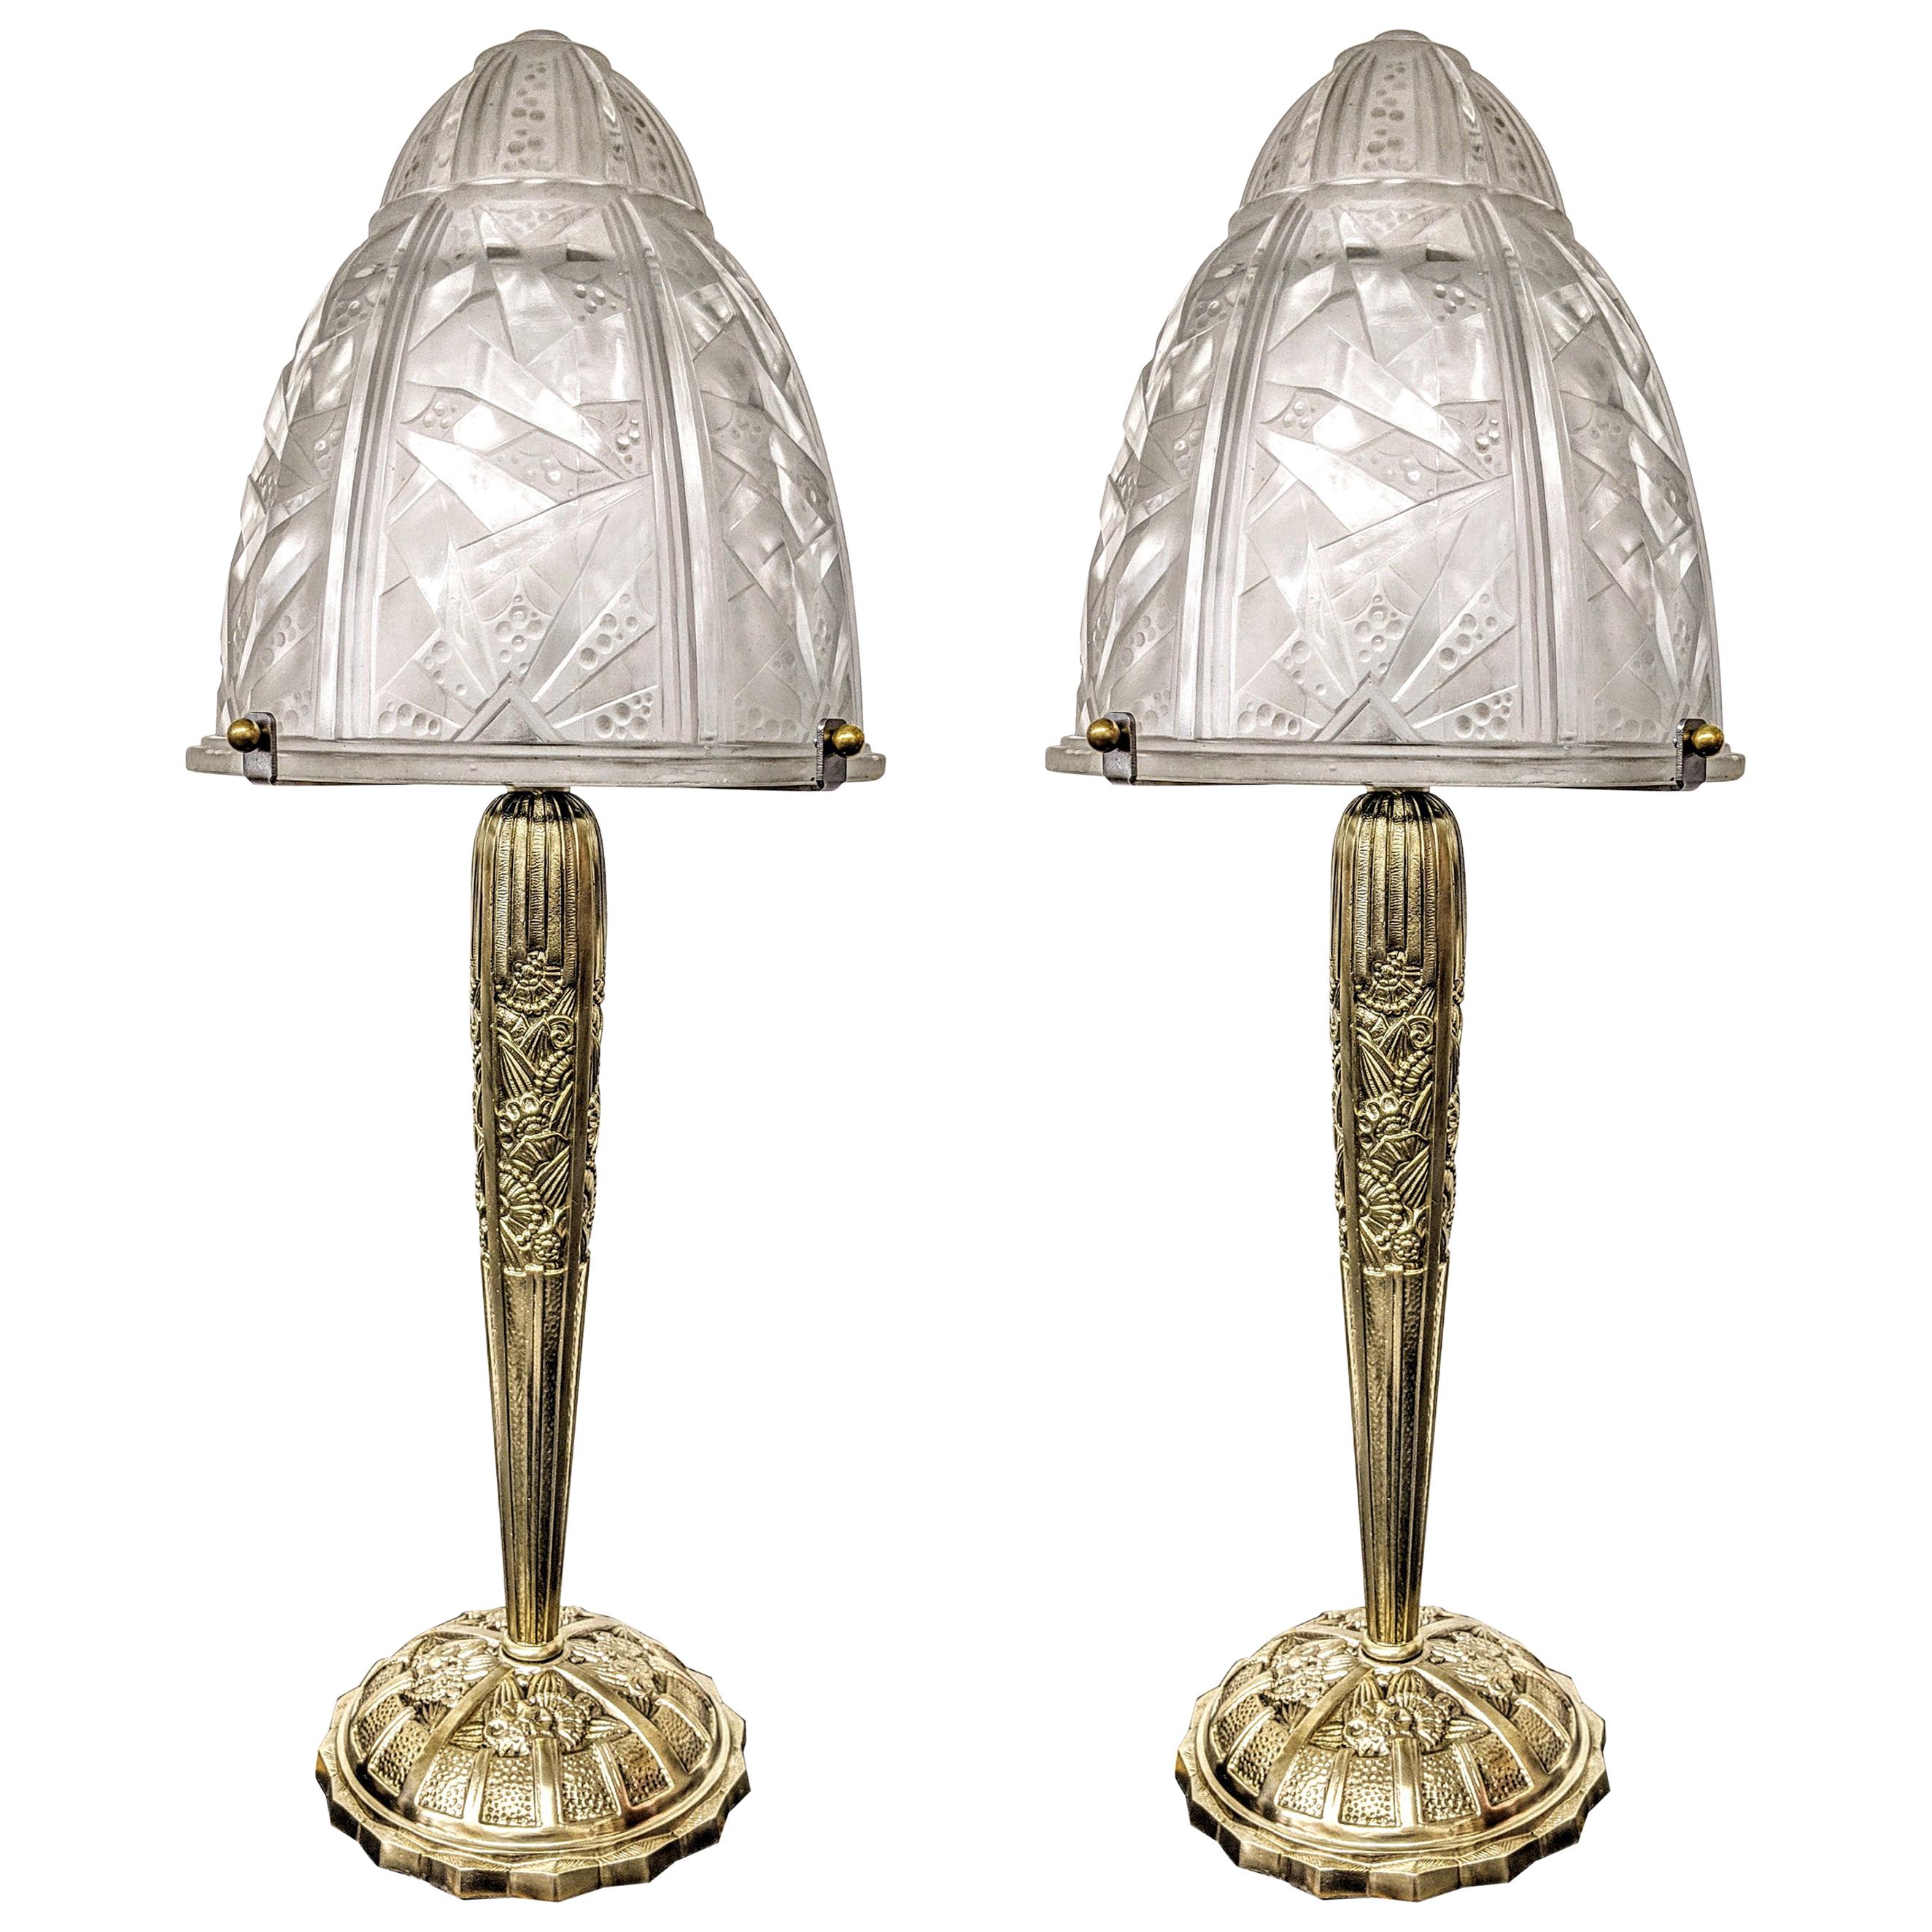 Pair of French Art Deco Table Lamps by Muller Frères